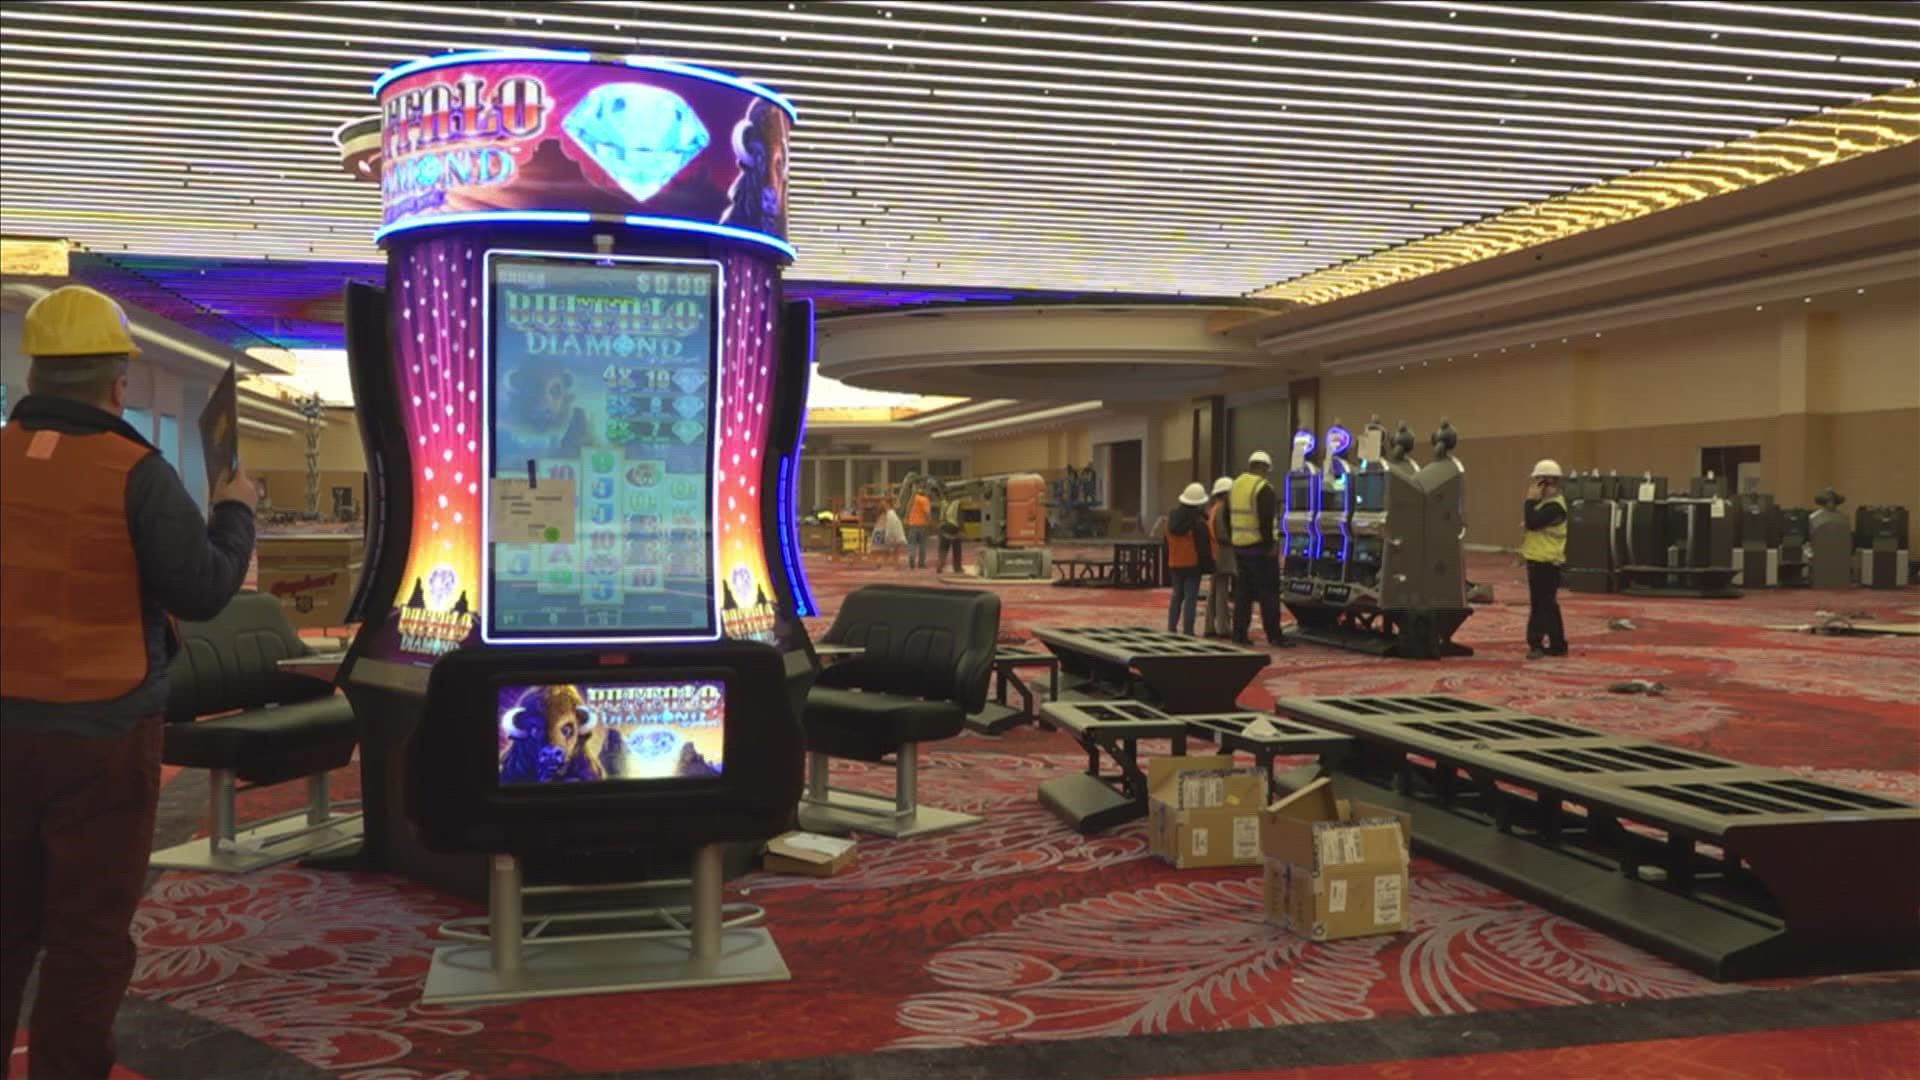 Southland officials said the construction on the new casino complex is on schedule to open in the spring. The hotel will follow later in the year.